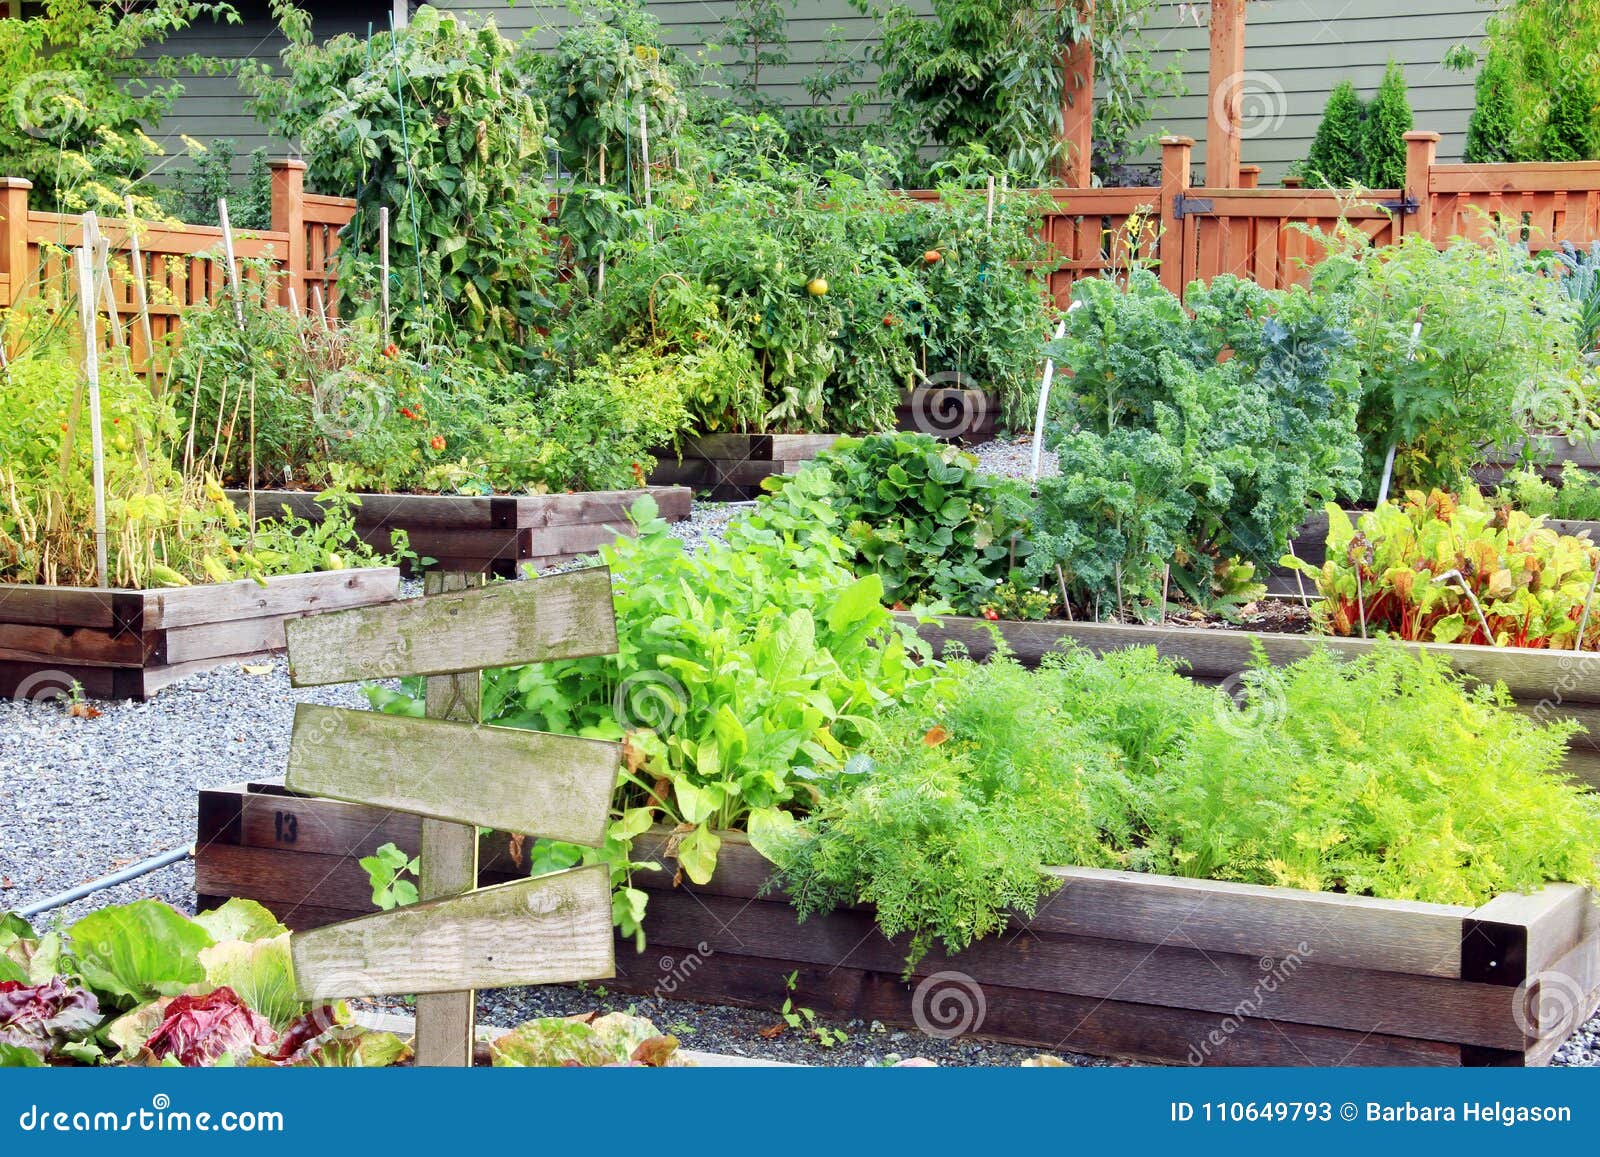 vegetable and herb garden.